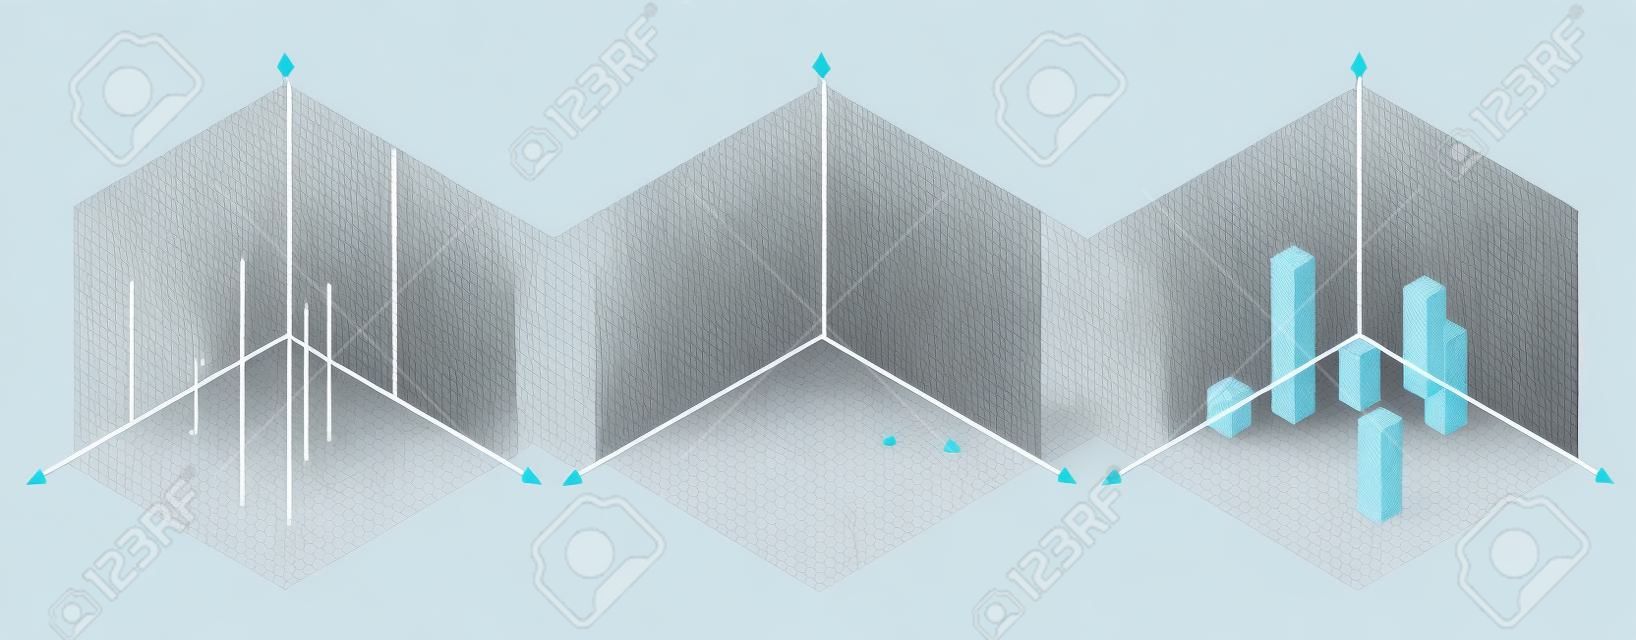 Isometric drawing a thirty degreesangle is applied to its sides. The cube opposite. Isometric Grid vector